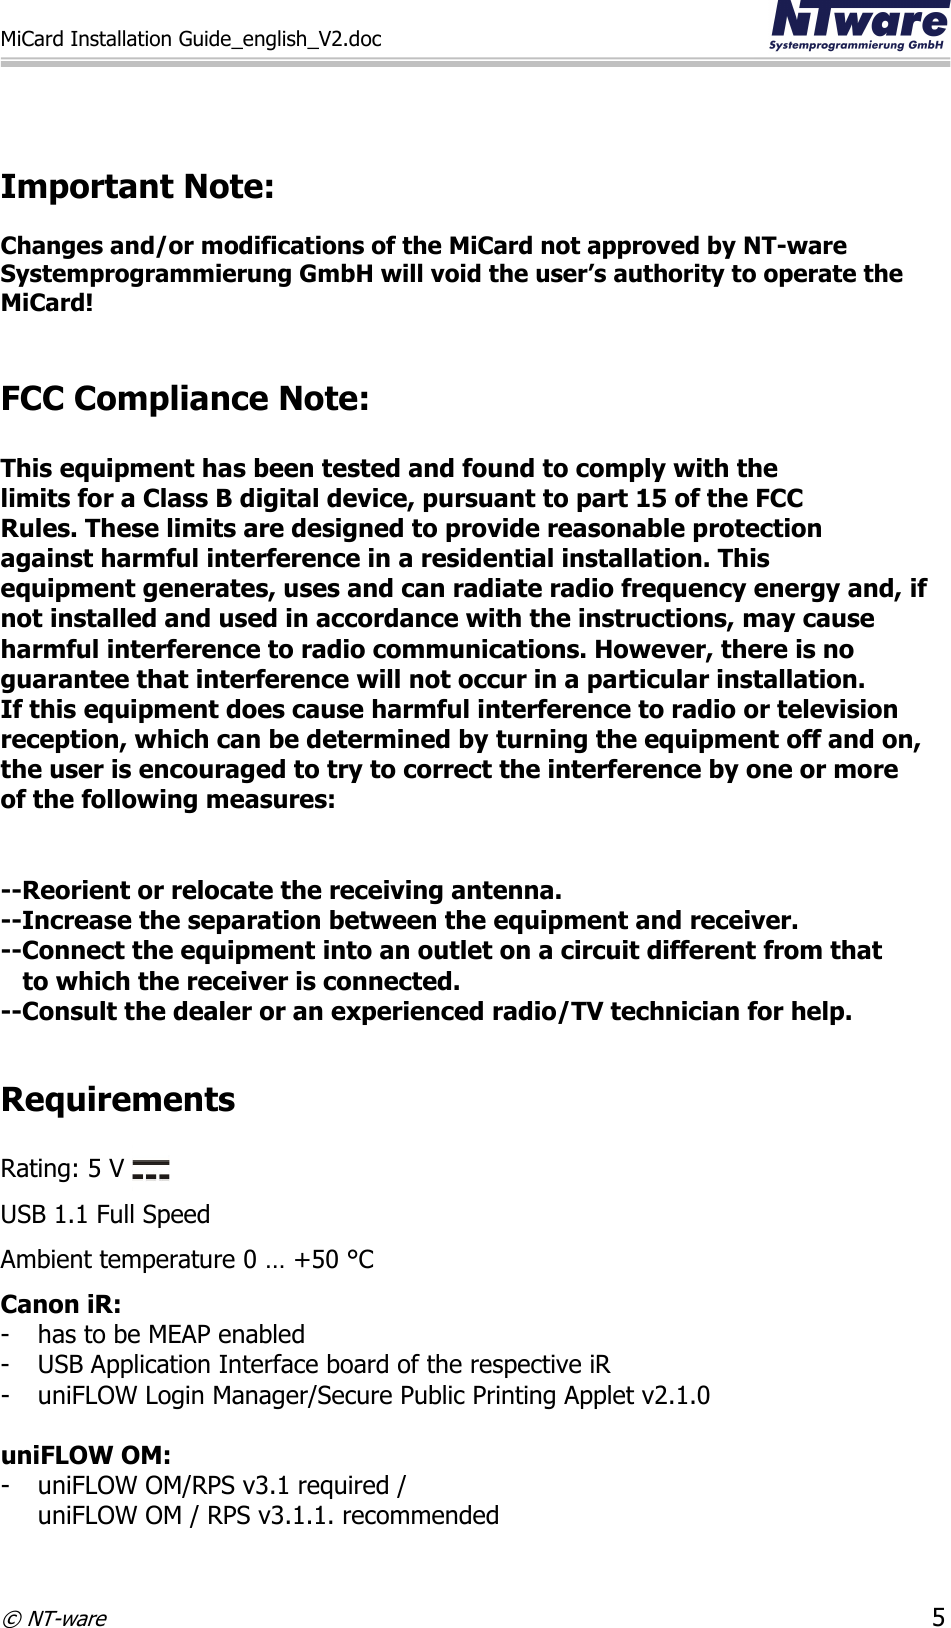 MiCard Installation Guide_english_V2.doc     © NT-ware 5   Important Note:  Changes and/or modifications of the MiCard not approved by NT-ware Systemprogrammierung GmbH will void the user’s authority to operate the MiCard!   FCC Compliance Note:   This equipment has been tested and found to comply with the  limits for a Class B digital device, pursuant to part 15 of the FCC  Rules. These limits are designed to provide reasonable protection  against harmful interference in a residential installation. This  equipment generates, uses and can radiate radio frequency energy and, if  not installed and used in accordance with the instructions, may cause  harmful interference to radio communications. However, there is no  guarantee that interference will not occur in a particular installation.  If this equipment does cause harmful interference to radio or television  reception, which can be determined by turning the equipment off and on,  the user is encouraged to try to correct the interference by one or more  of the following measures:   --Reorient or relocate the receiving antenna. --Increase the separation between the equipment and receiver. --Connect the equipment into an outlet on a circuit different from that     to which the receiver is connected. --Consult the dealer or an experienced radio/TV technician for help.  Requirements  Rating: 5 V   USB 1.1 Full Speed  Ambient temperature 0 … +50 °C Canon iR: - has to be MEAP enabled - USB Application Interface board of the respective iR - uniFLOW Login Manager/Secure Public Printing Applet v2.1.0  uniFLOW OM: - uniFLOW OM/RPS v3.1 required / uniFLOW OM / RPS v3.1.1. recommended 